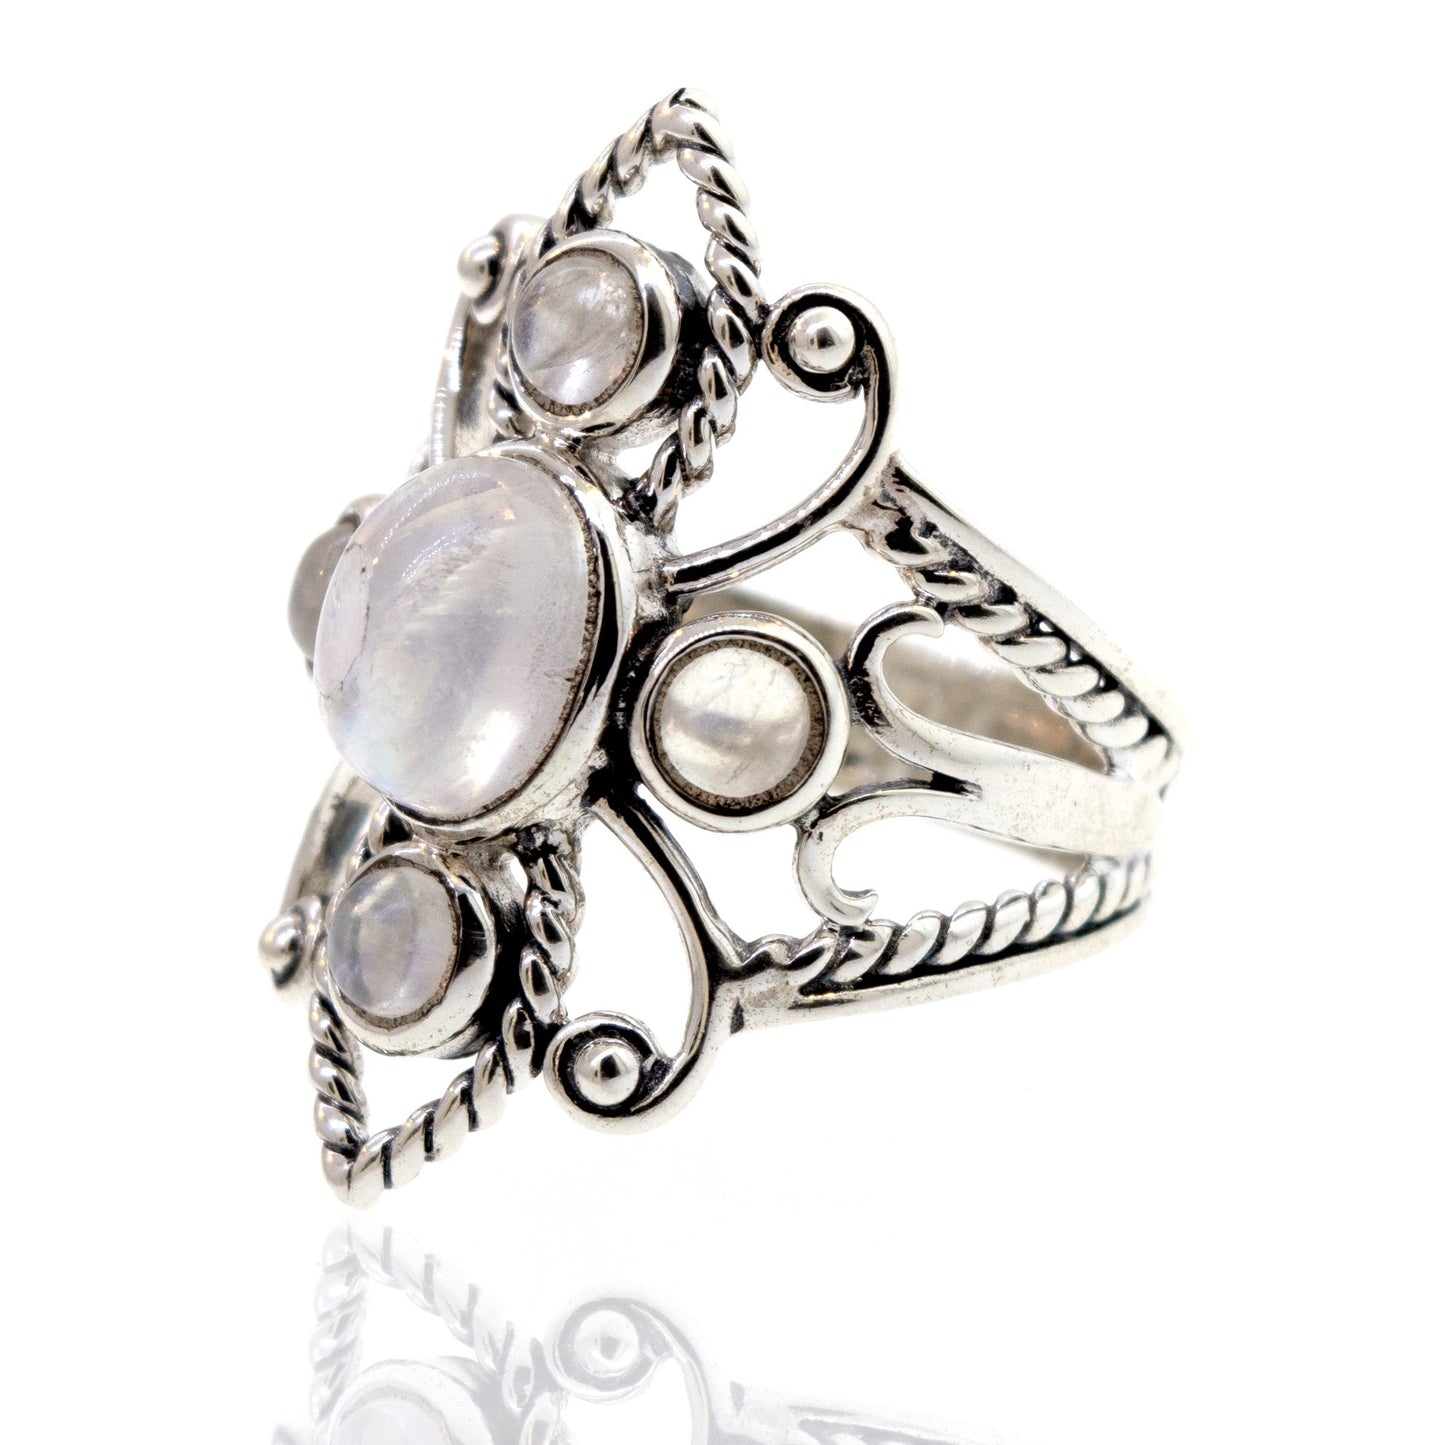 
                  
                    Online Only Exclusive Multistone Ring with multiple moonstones set in an intricate design, displayed against a white background with a reflection below.
                  
                